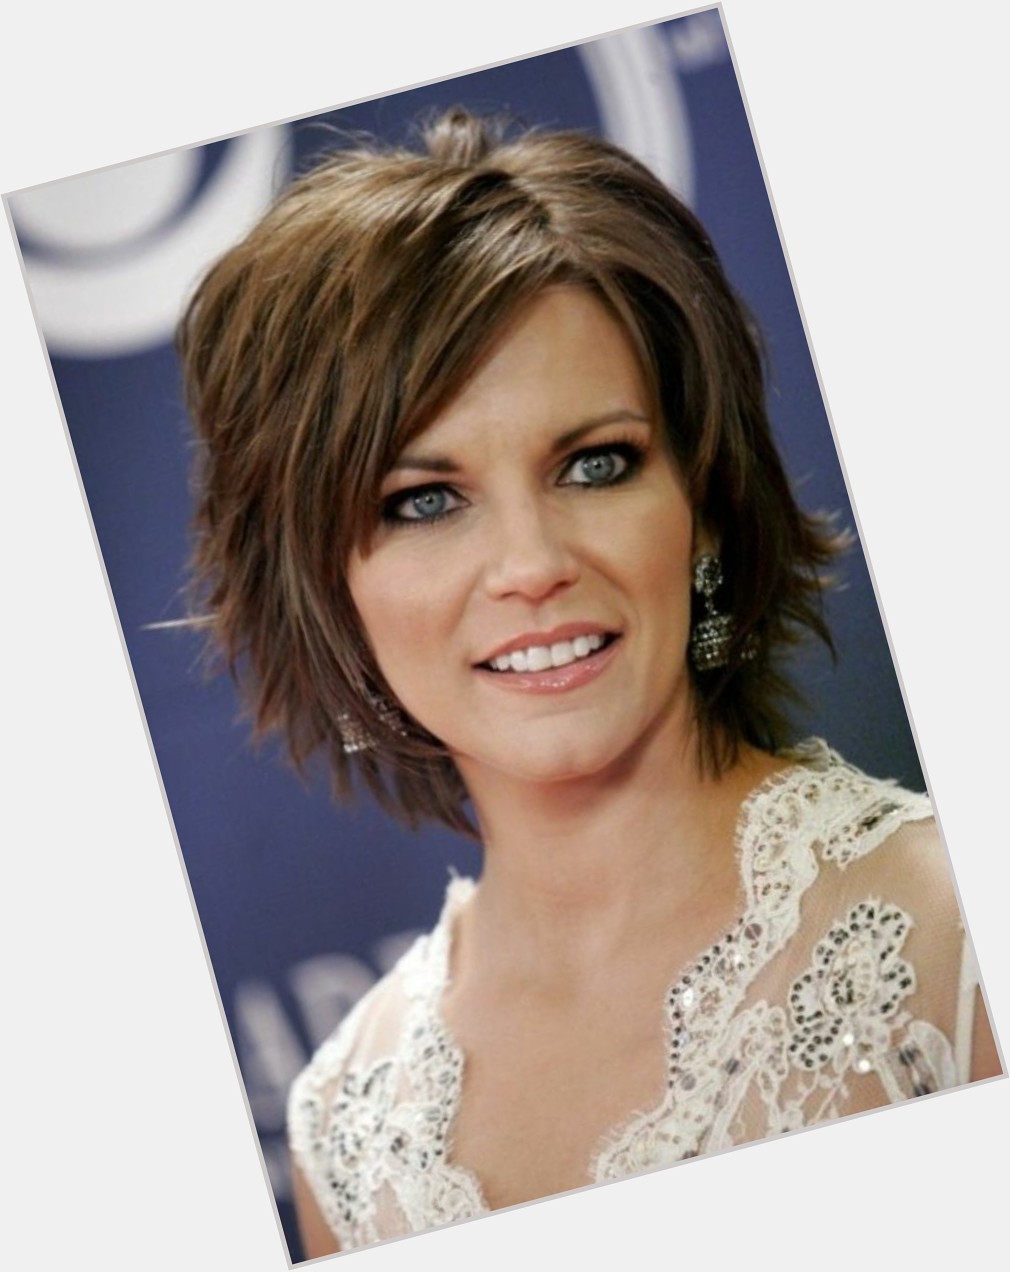 Happy Birthday country music singer song writer entertainer
Martina McBride  